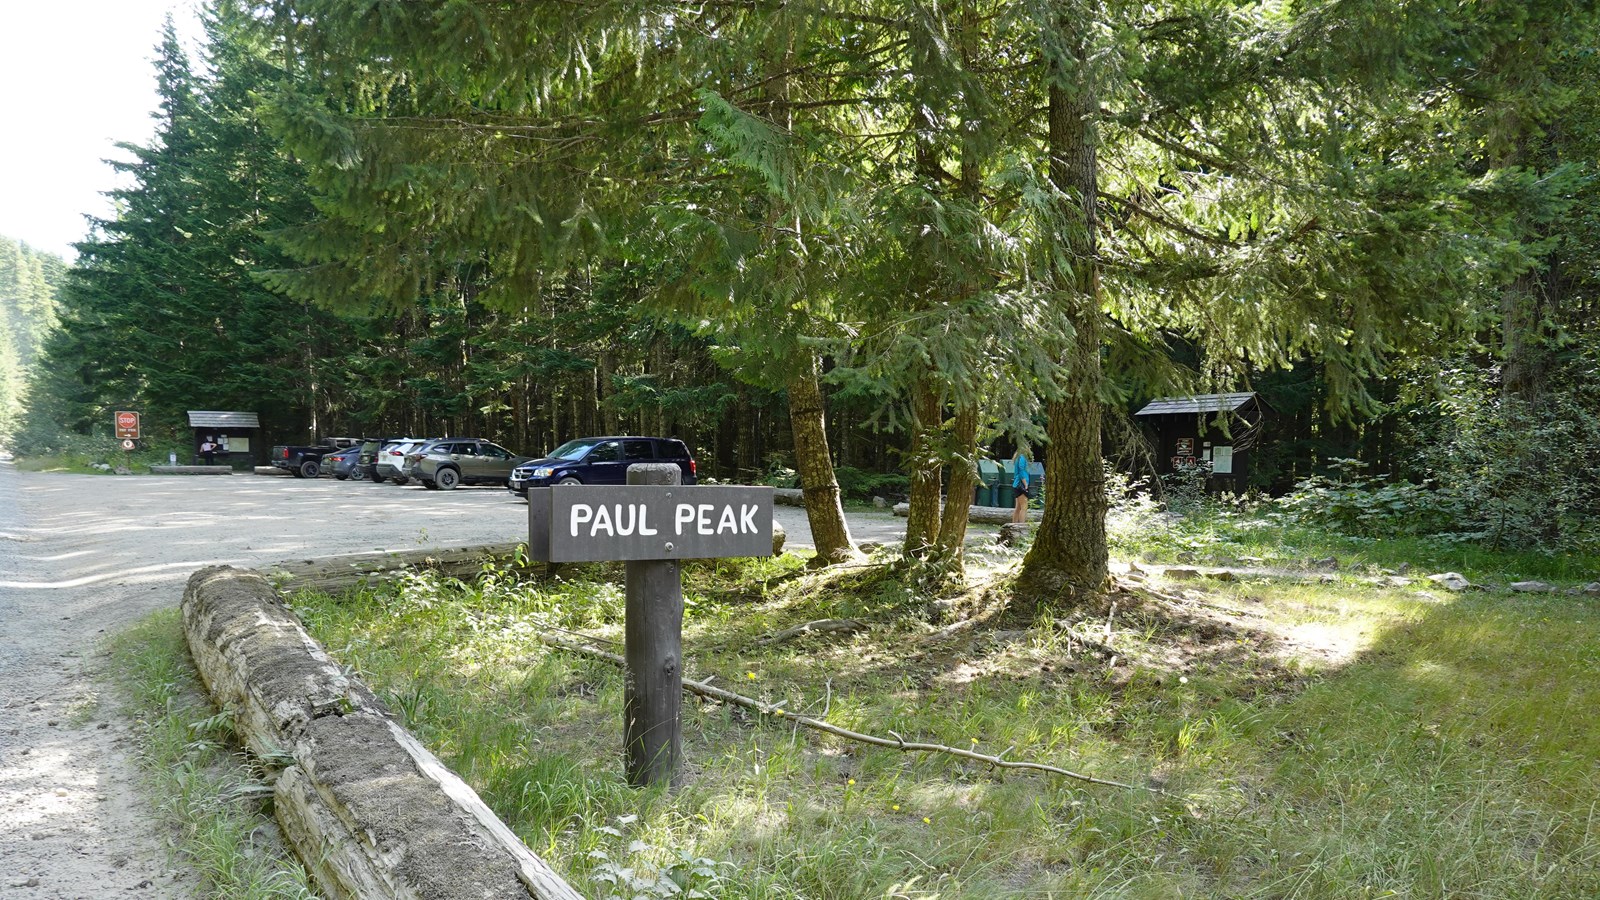 A dirt road in a forest leads to a parking area on the right with a small sign reading 